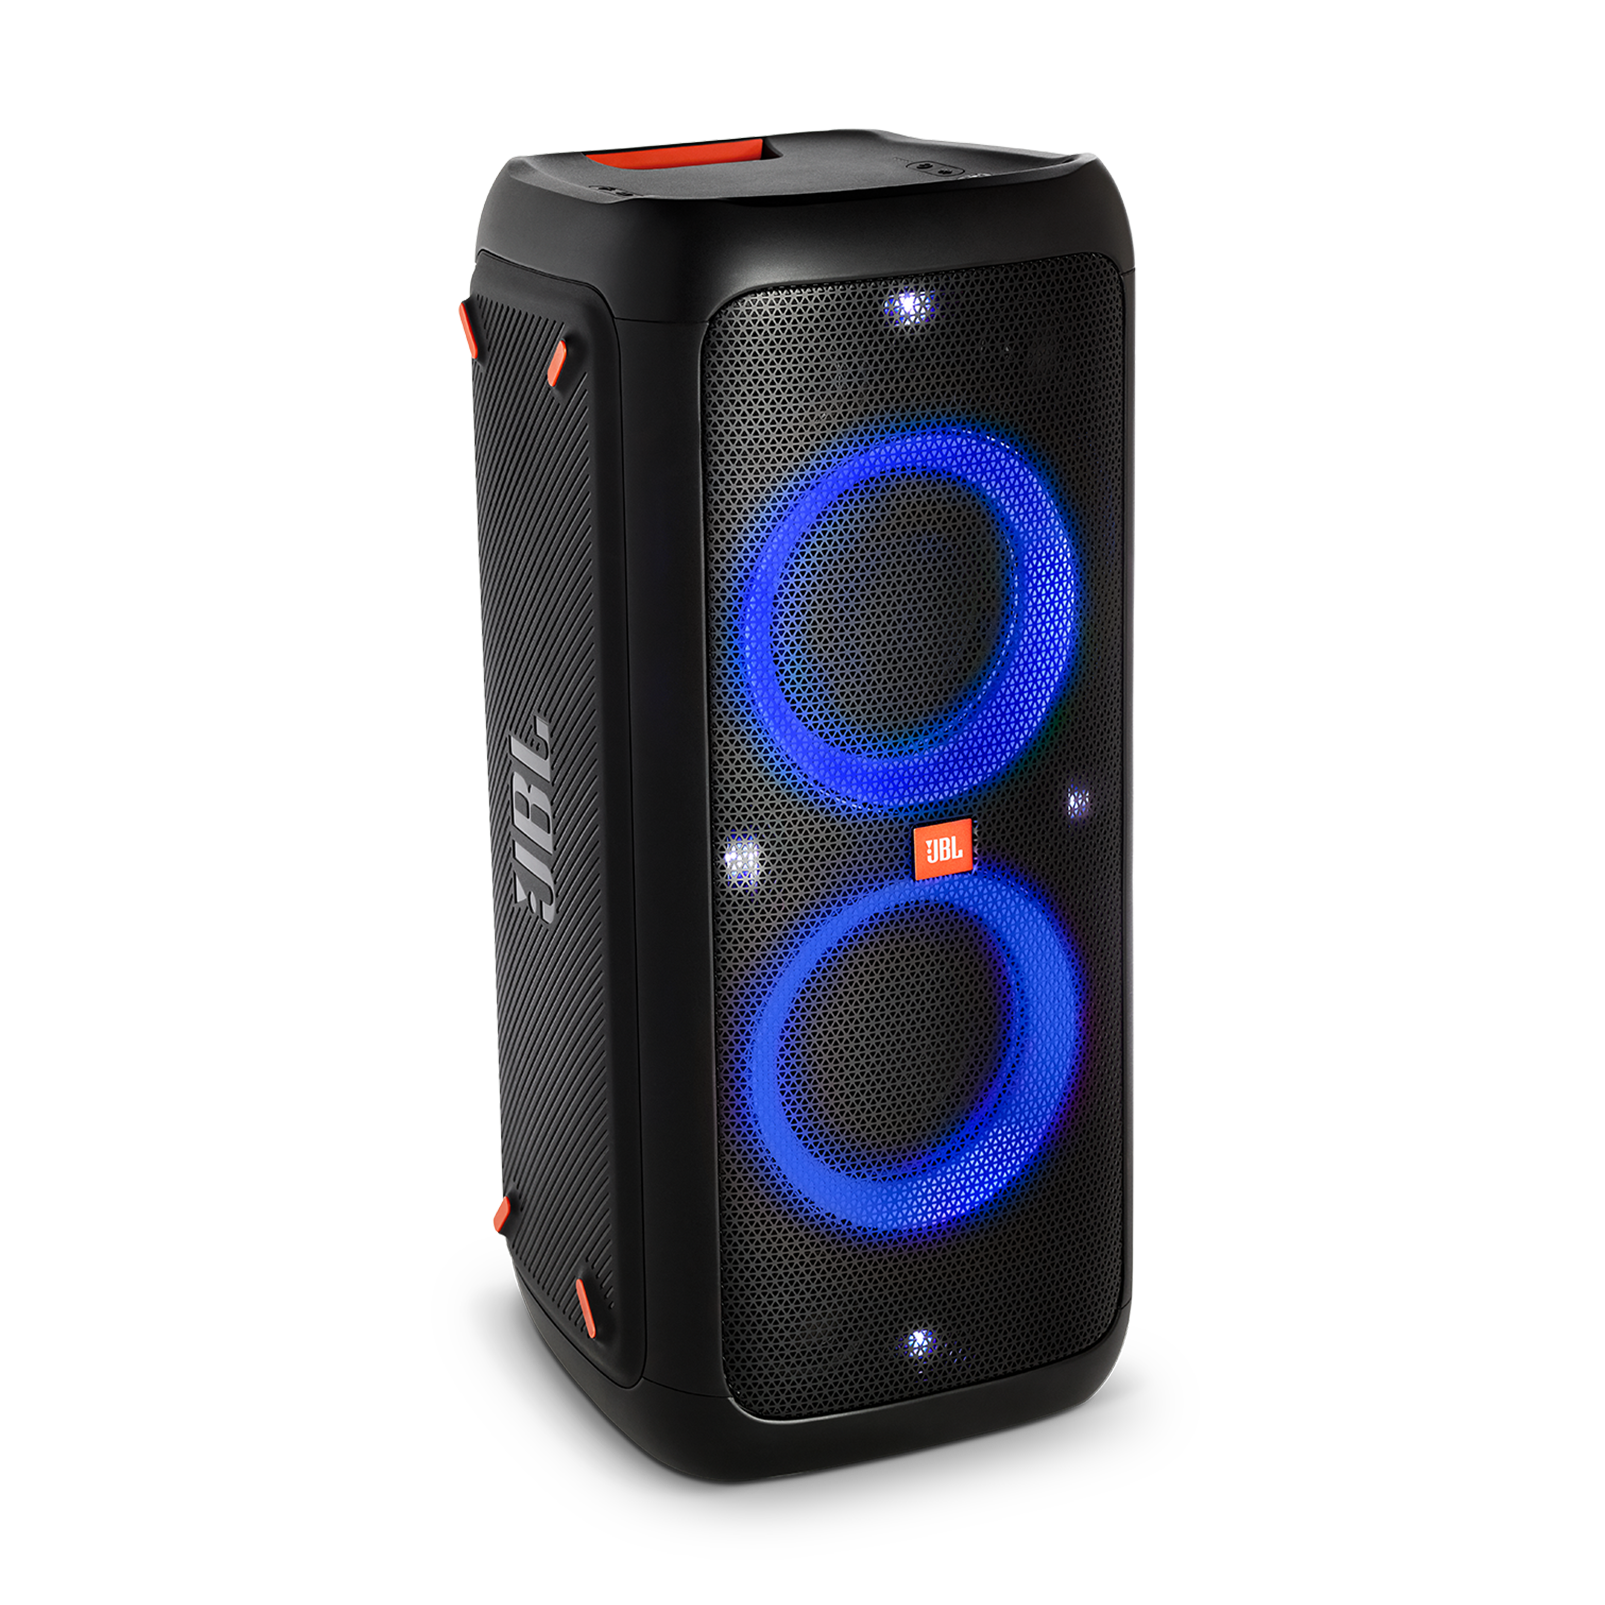 episodio espejo de puerta directorio JBL PartyBox 300 | Battery-powered portable Bluetooth party speaker with  light effects